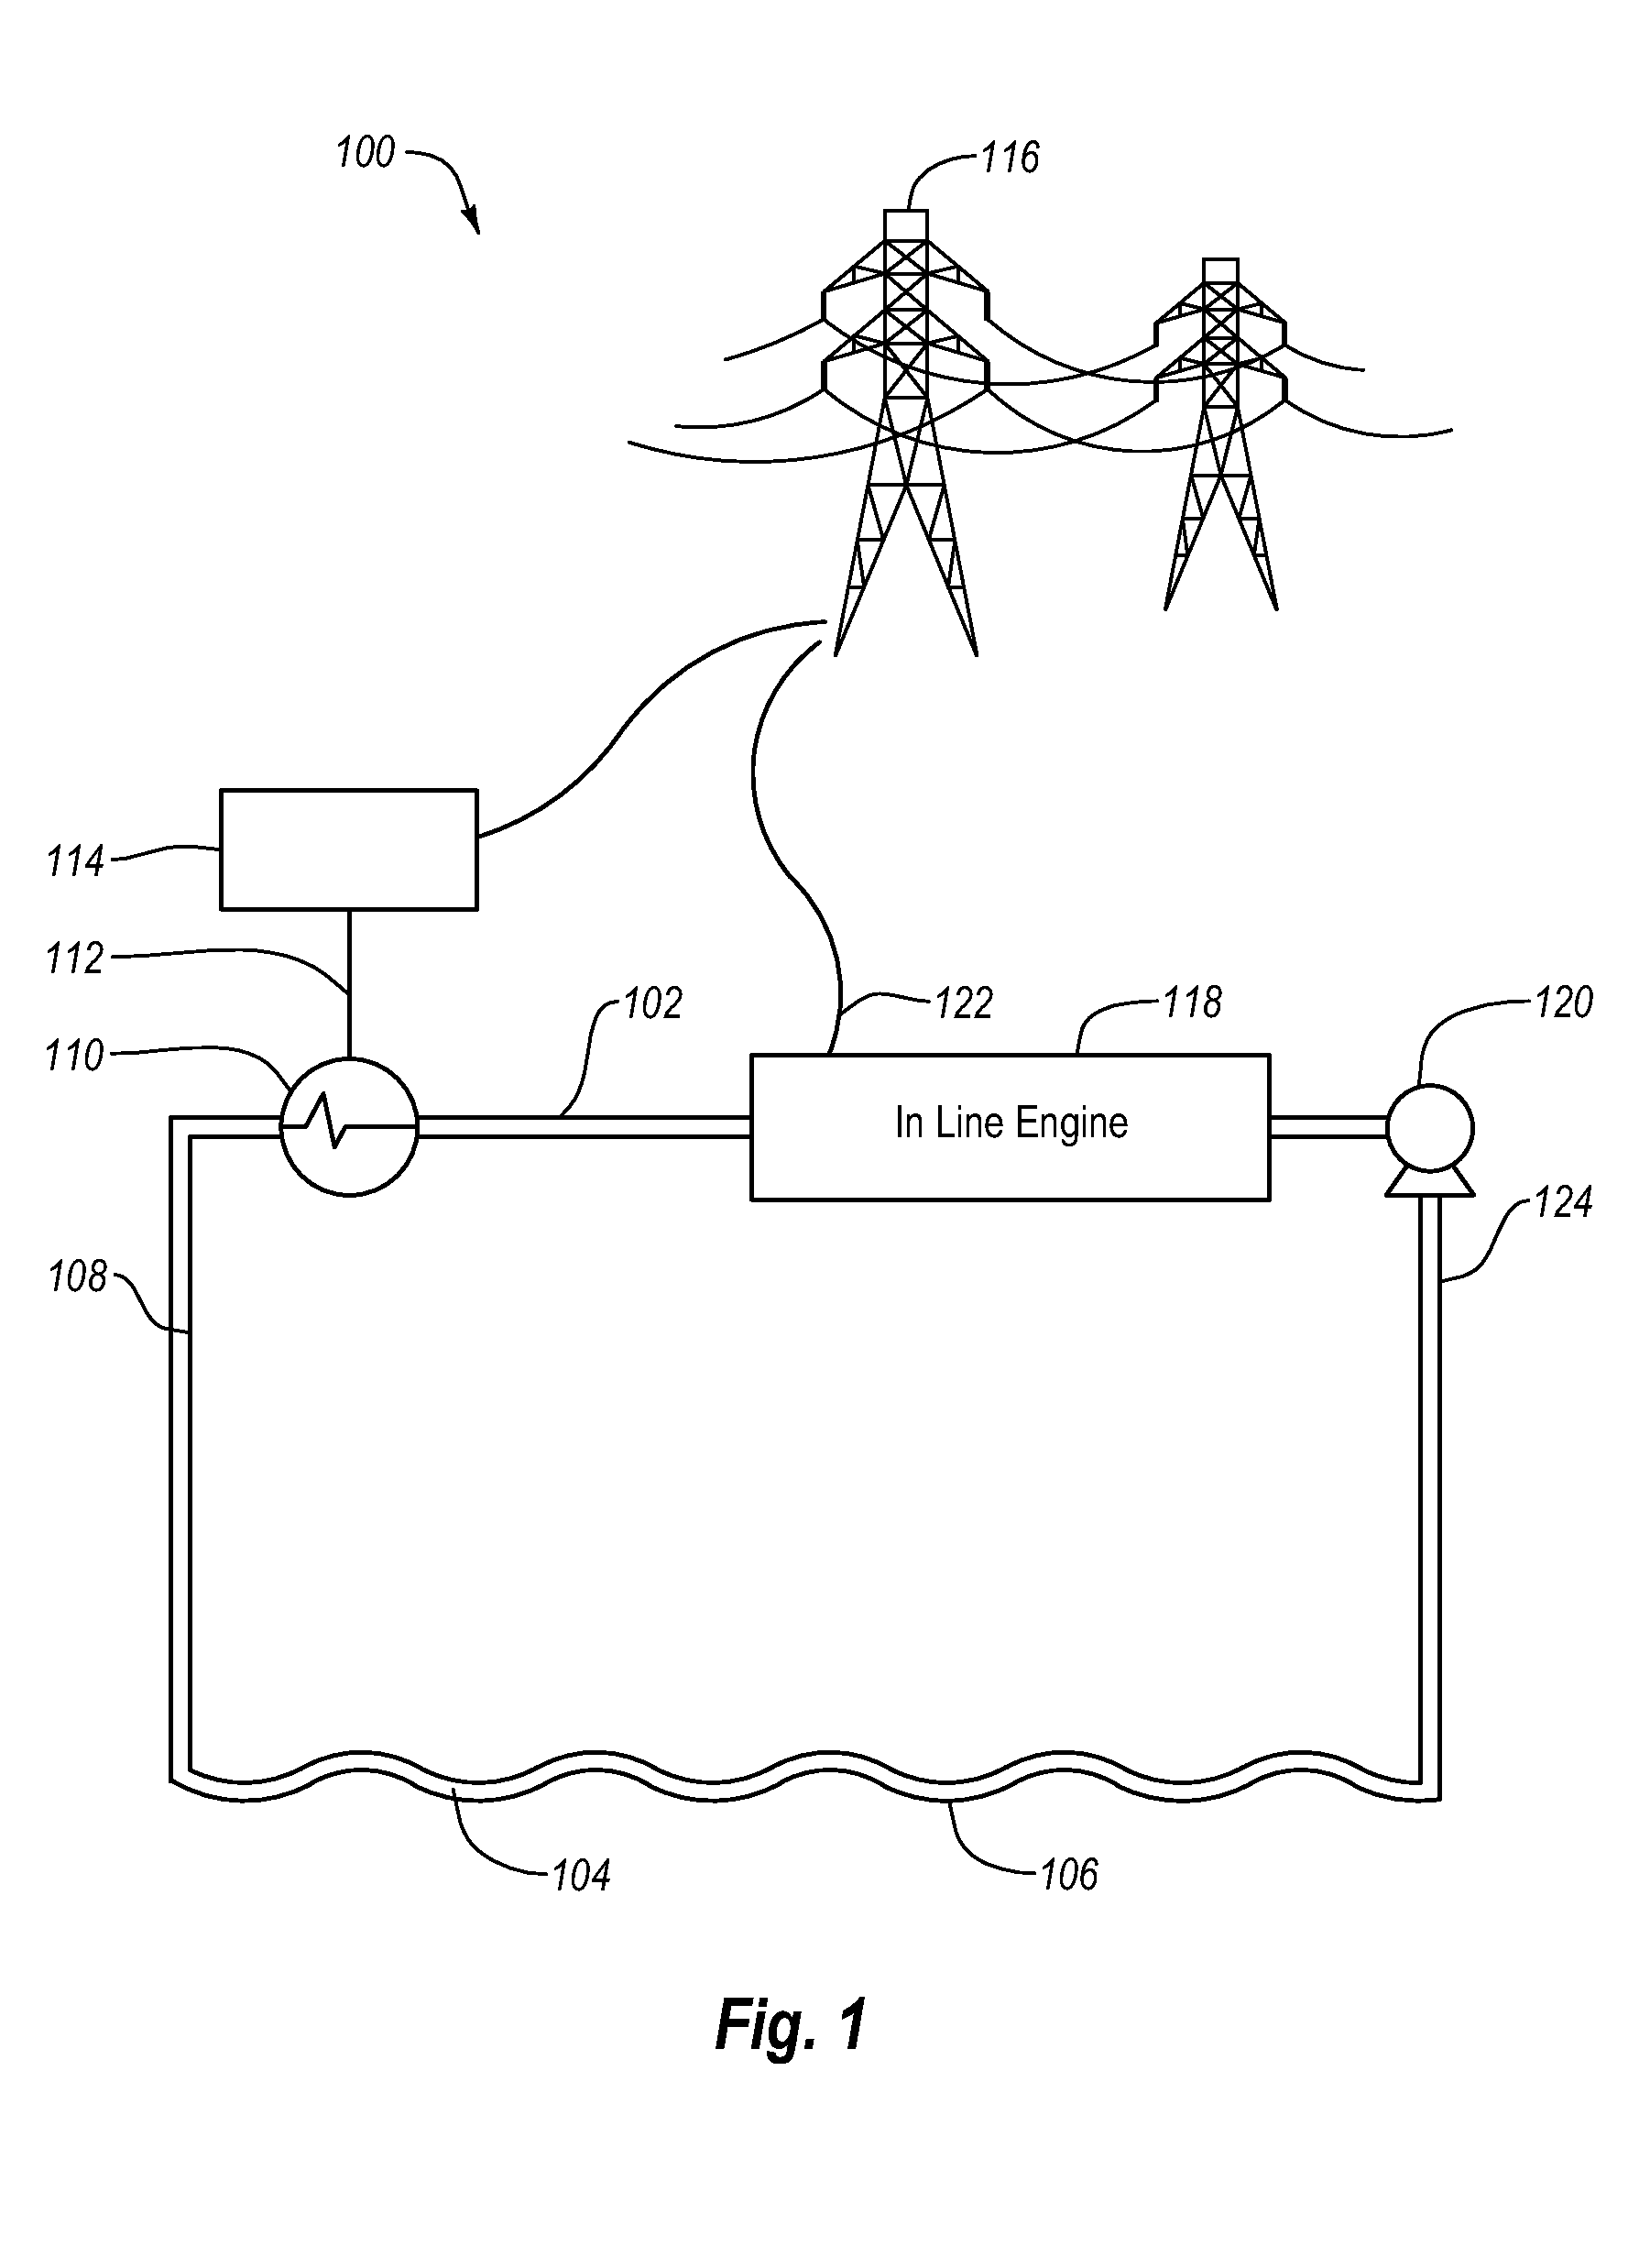 Process to obtain thermal and kinetic energy from a geothermal heat source using supercritical co2